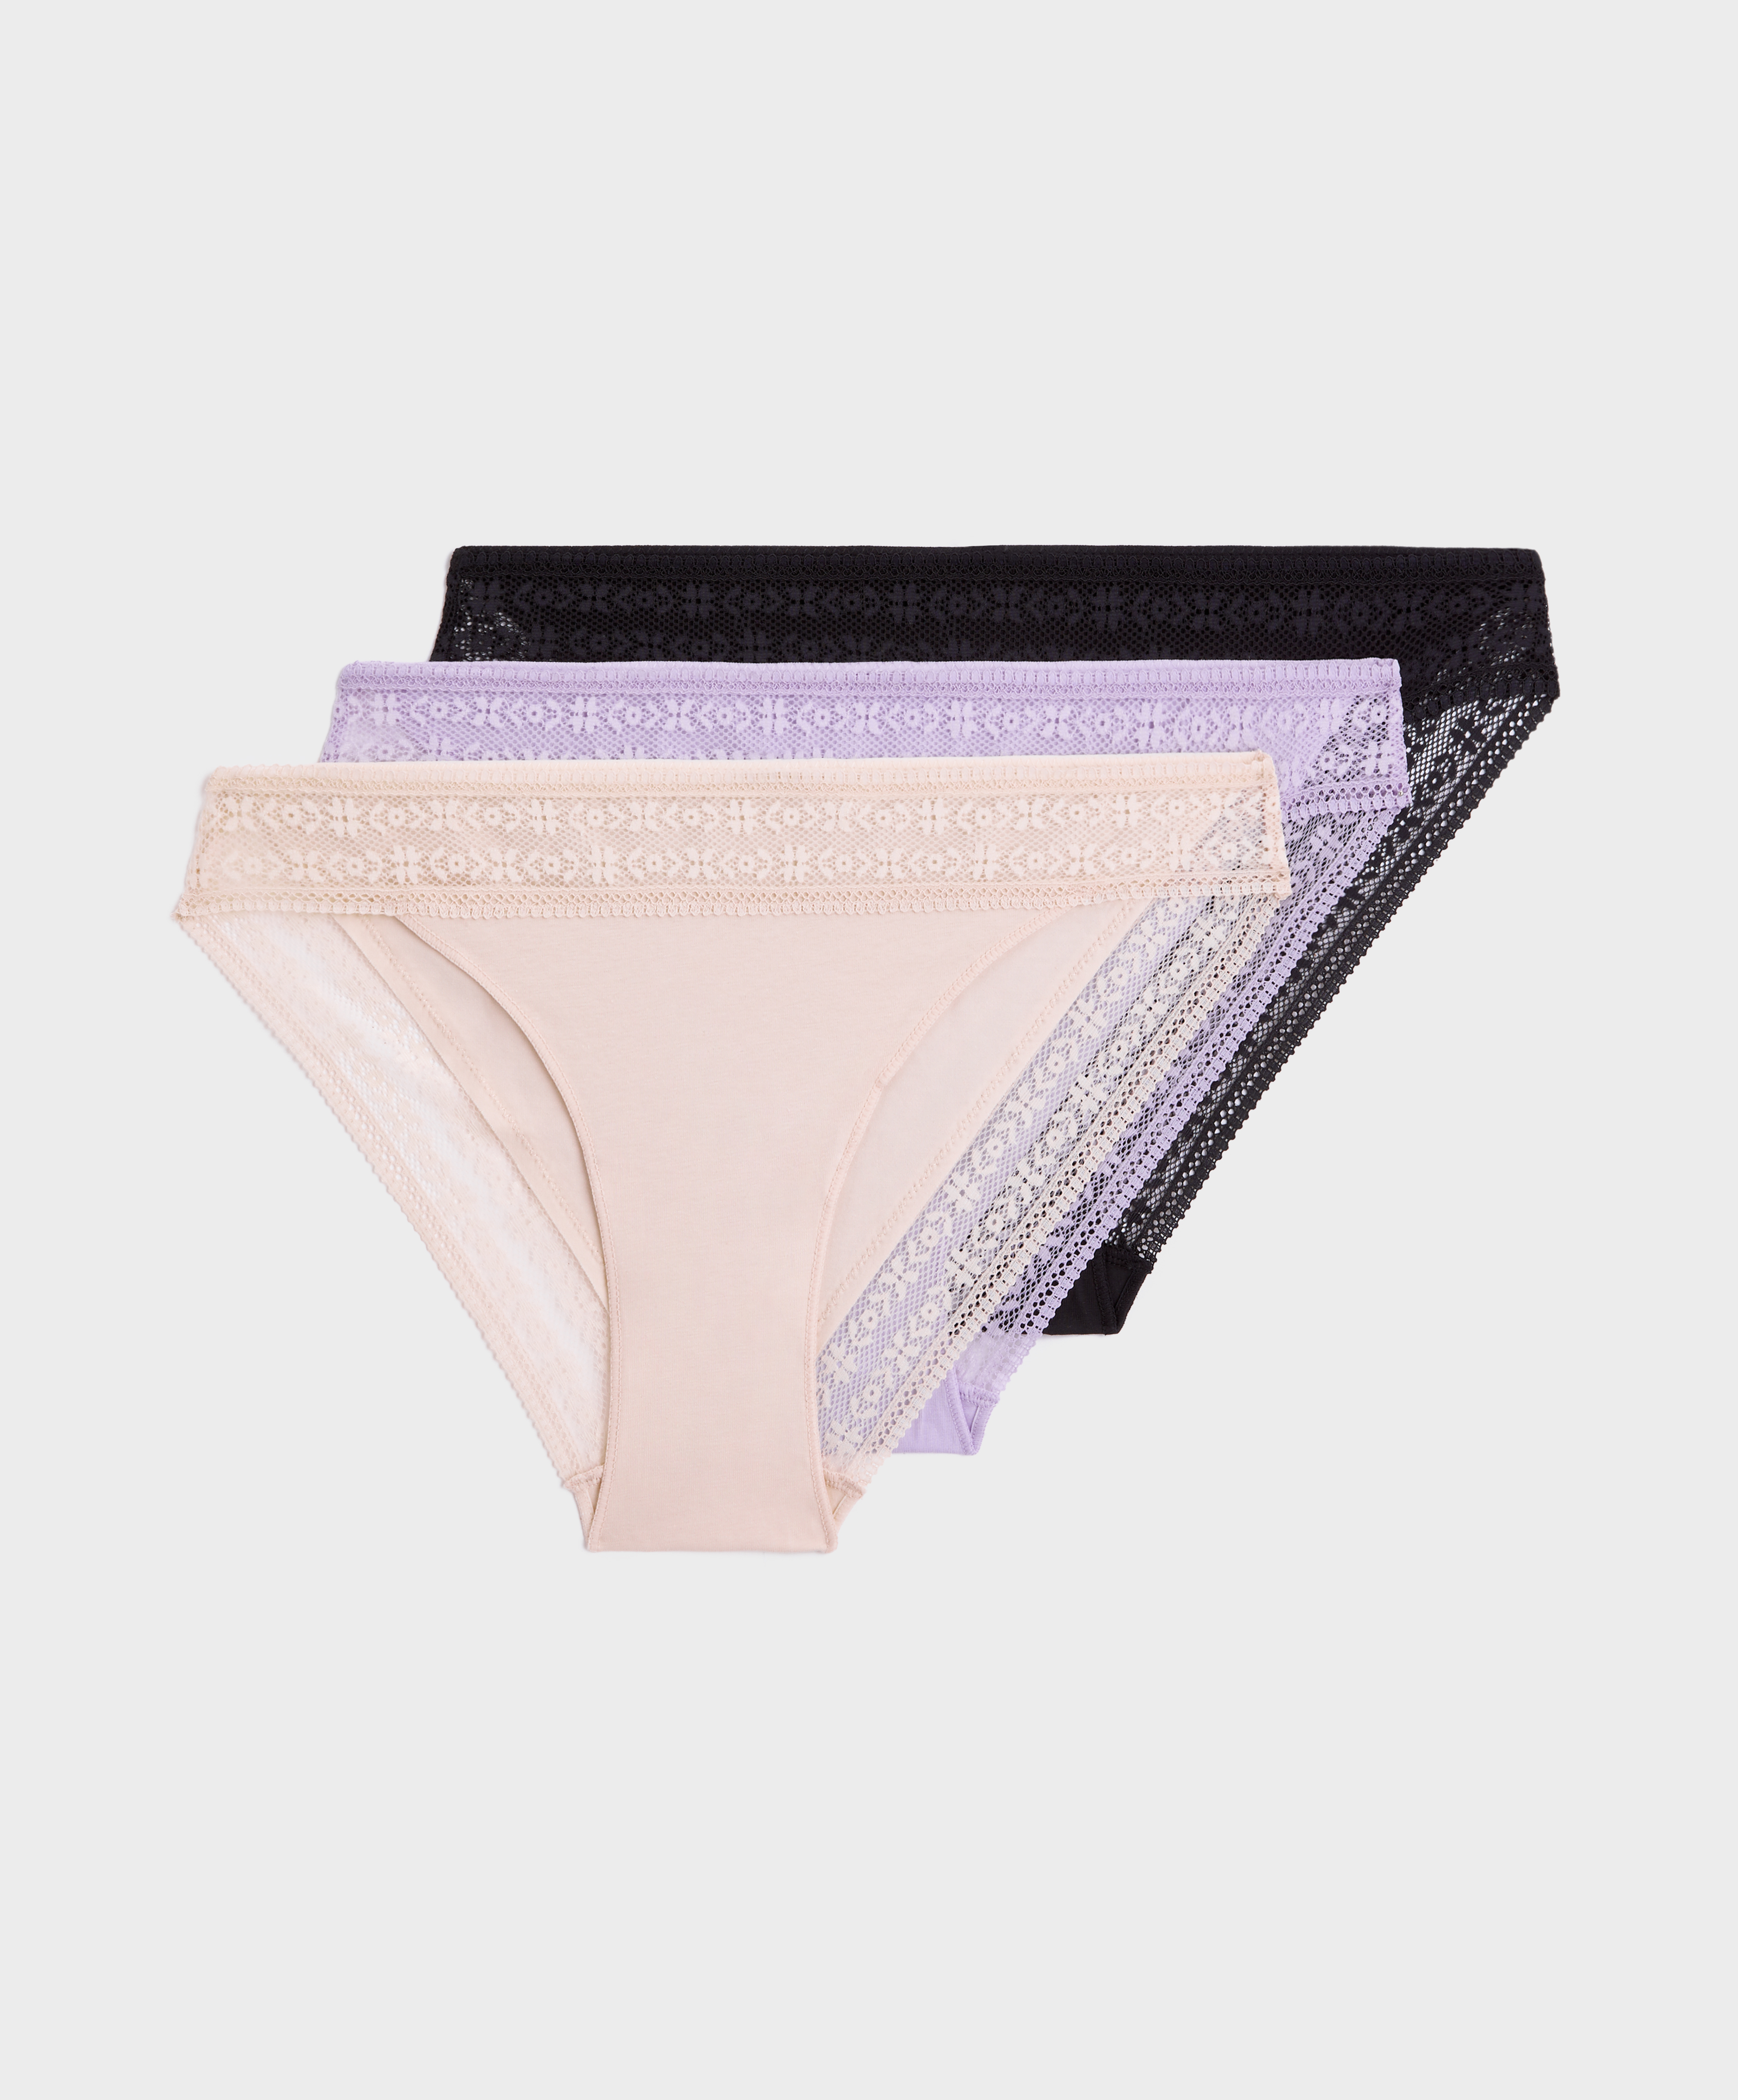 3 cotton and lace classic briefs